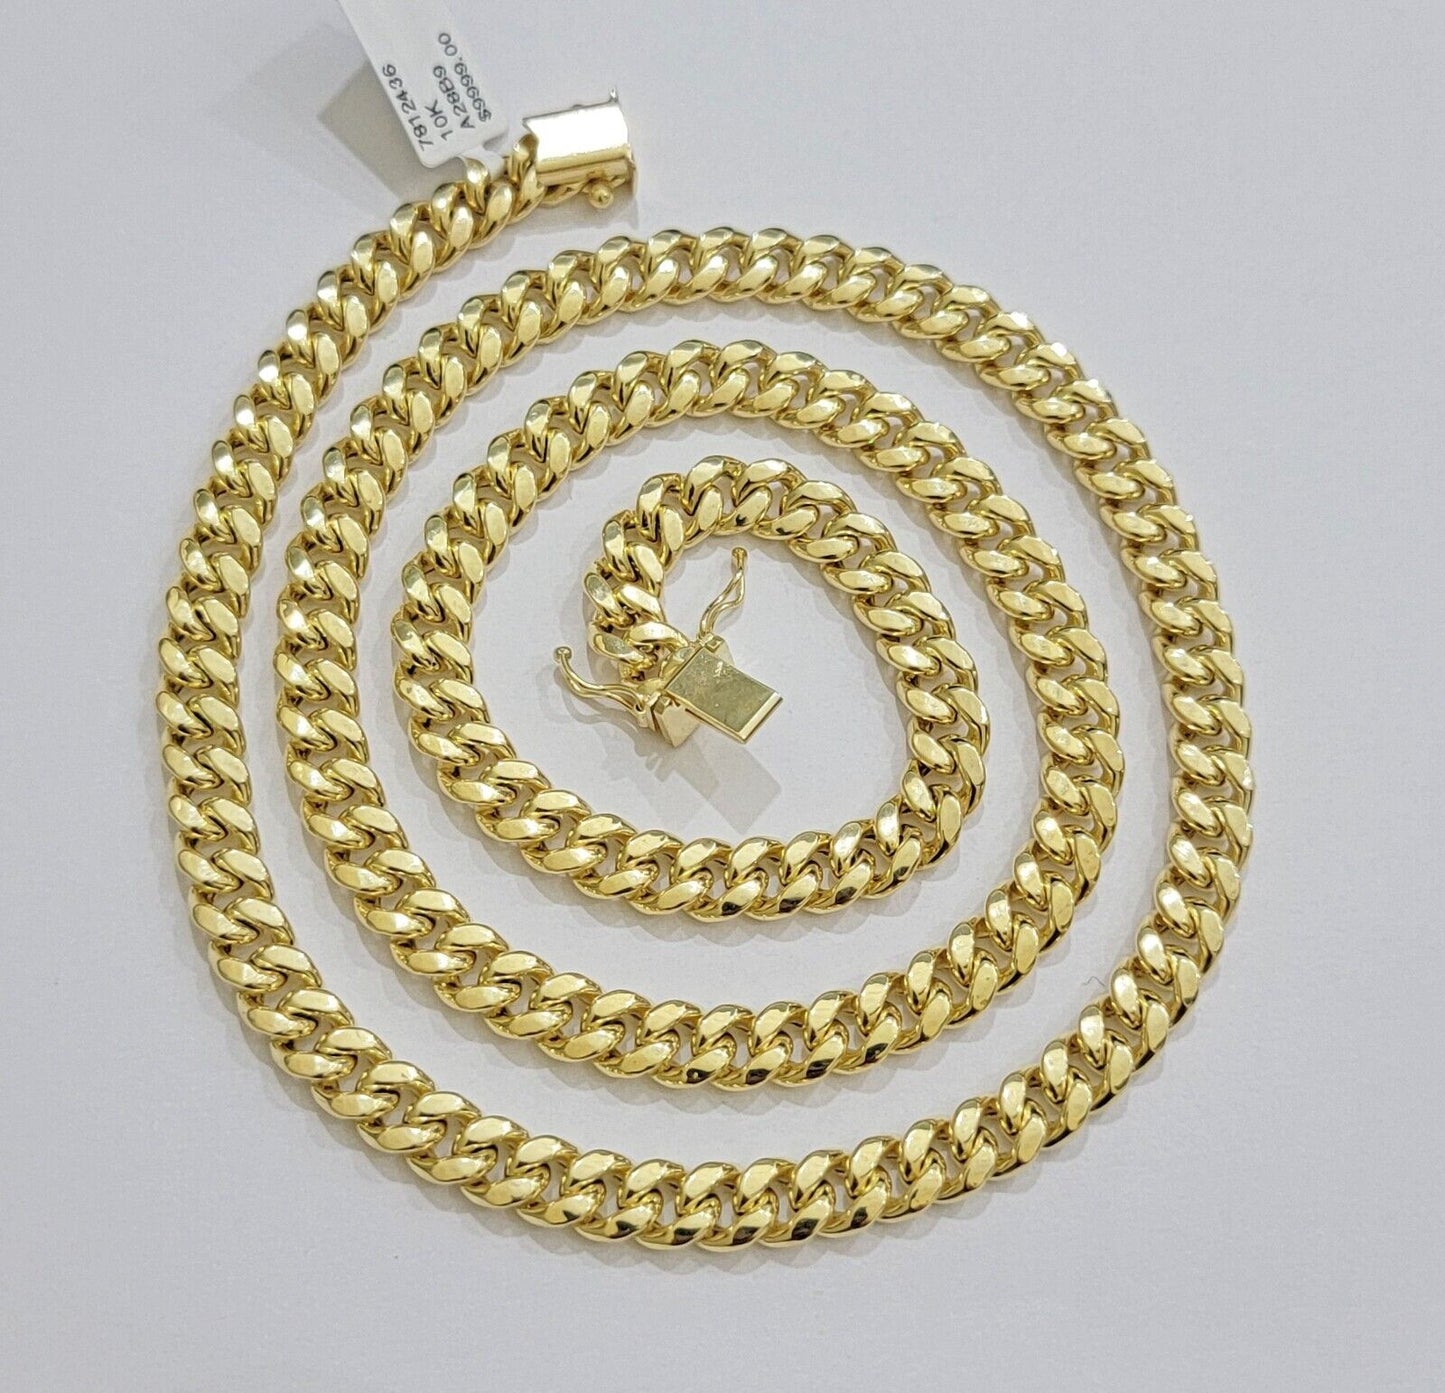 Real 10k Gold Chain Necklace Miami Cuban Link 20 - 30 Inch Men's 10KT 7mm